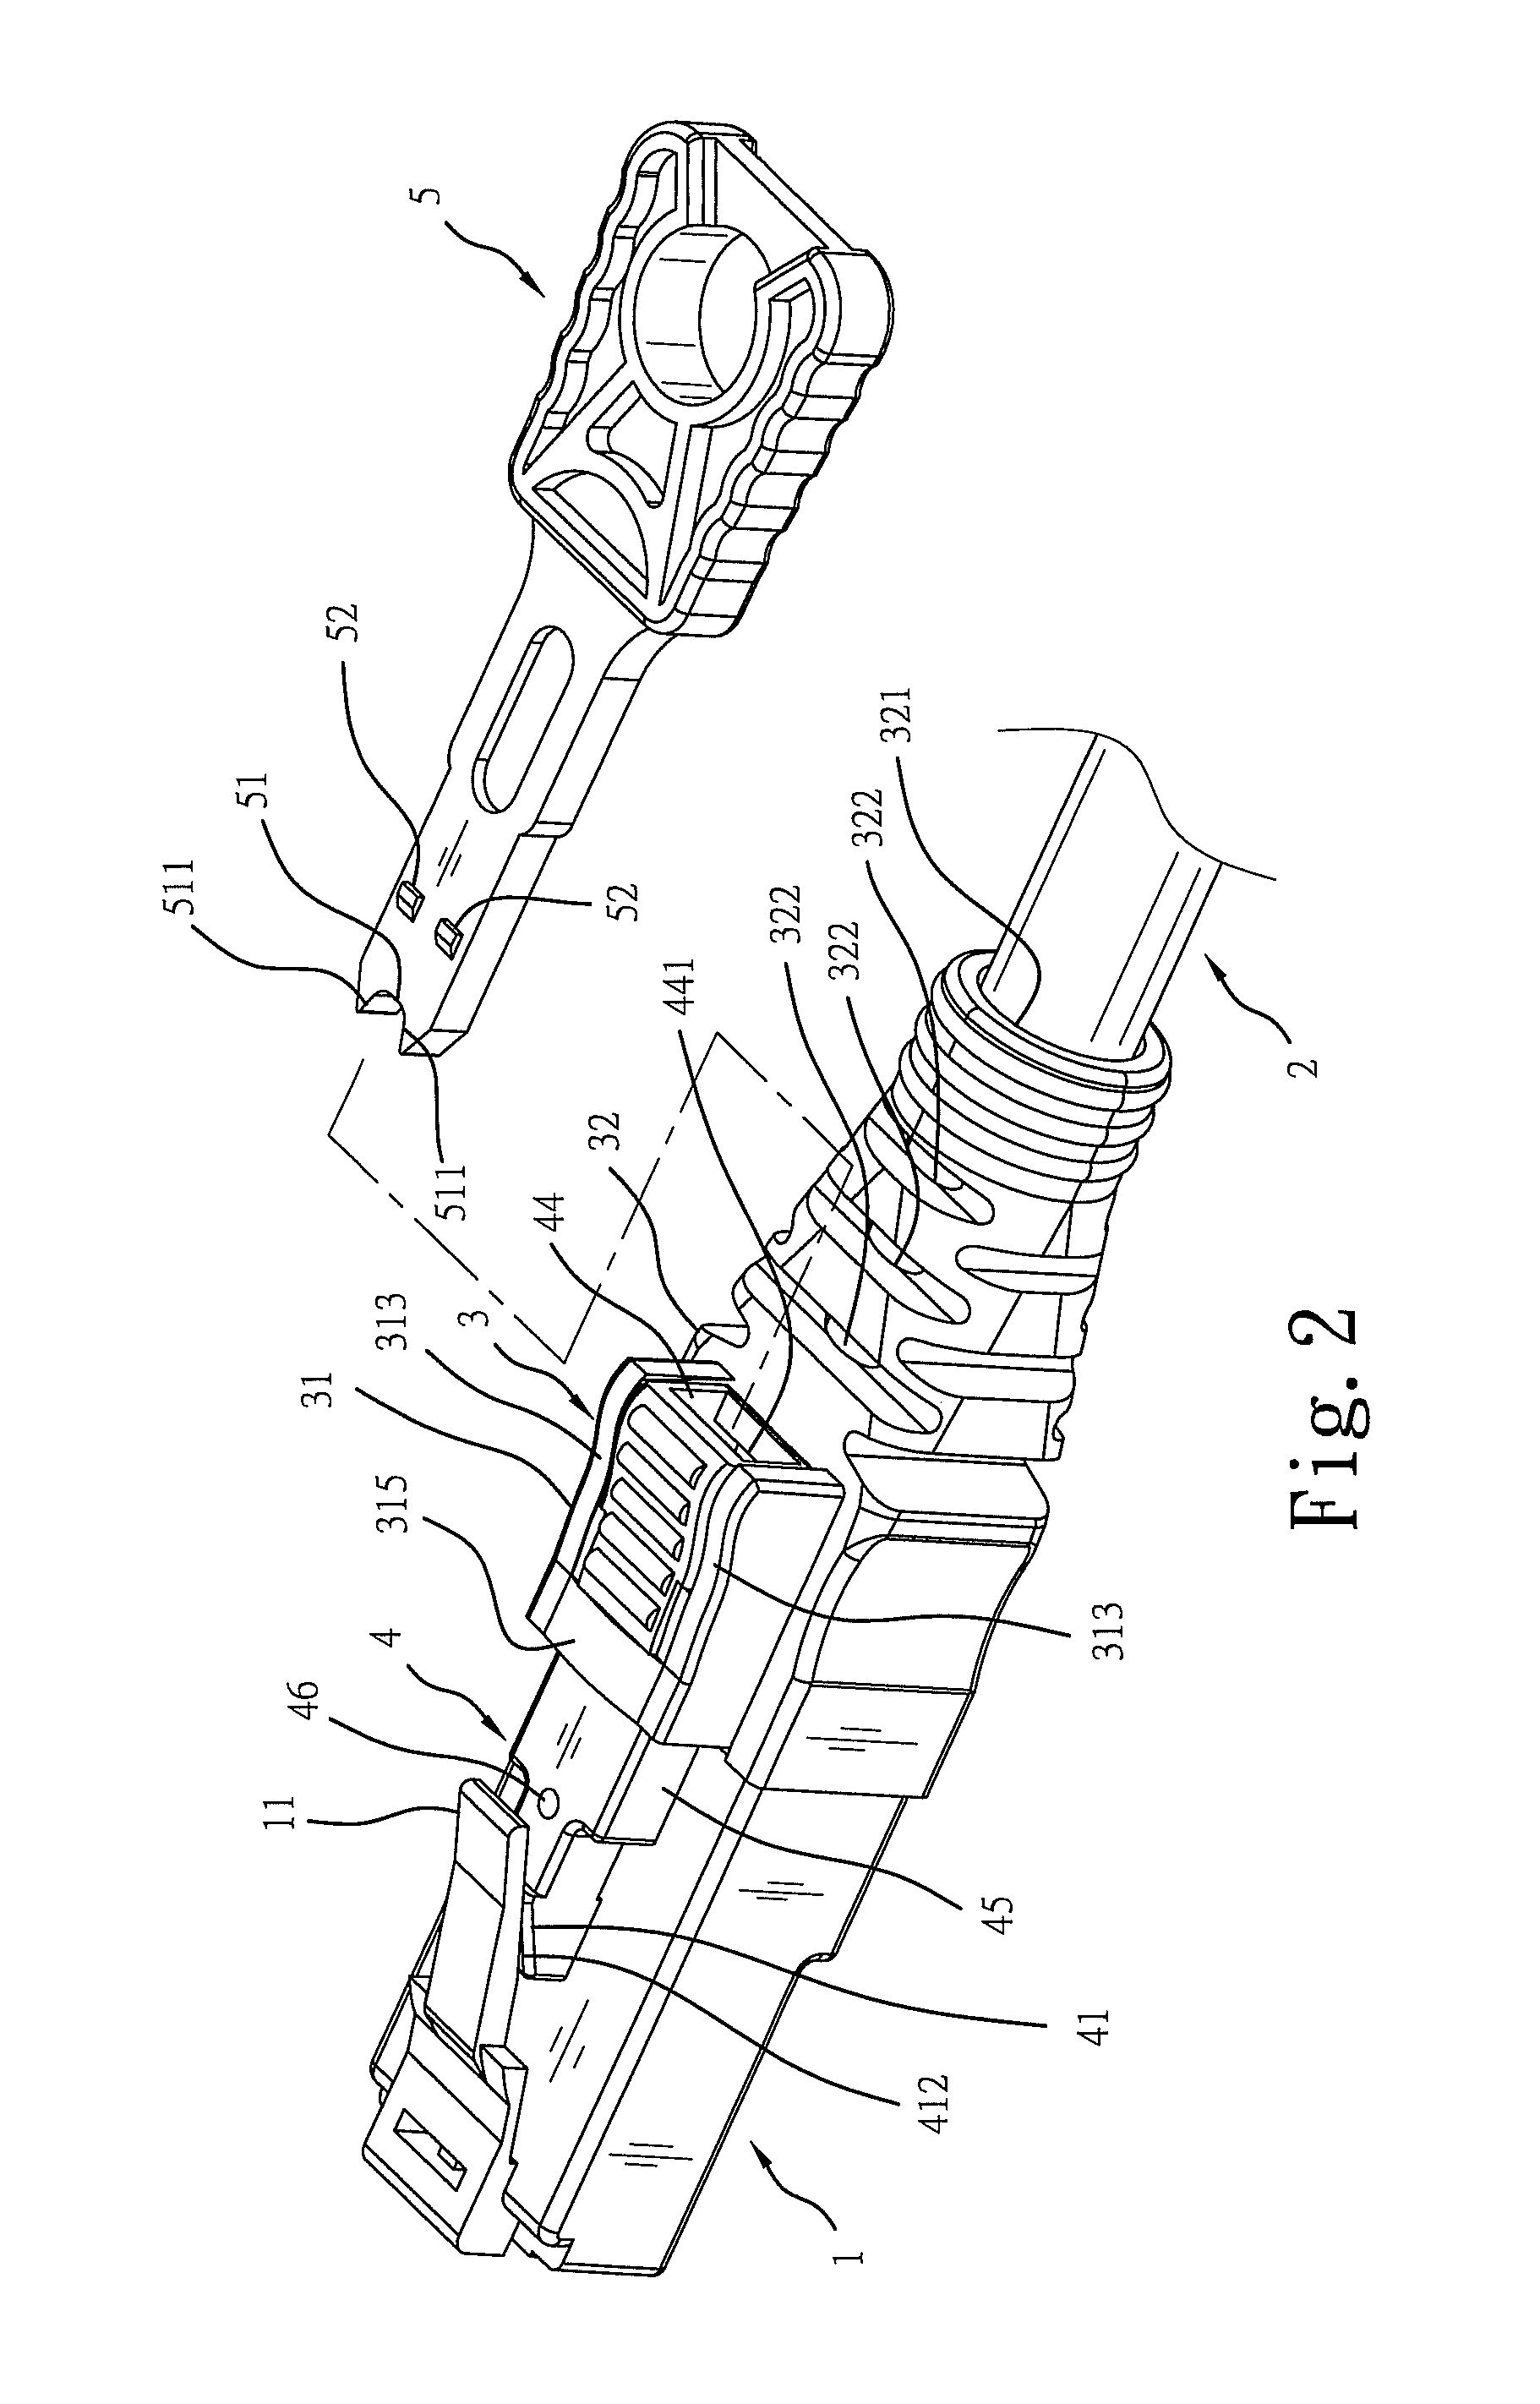 Plug security structure for electrical connector